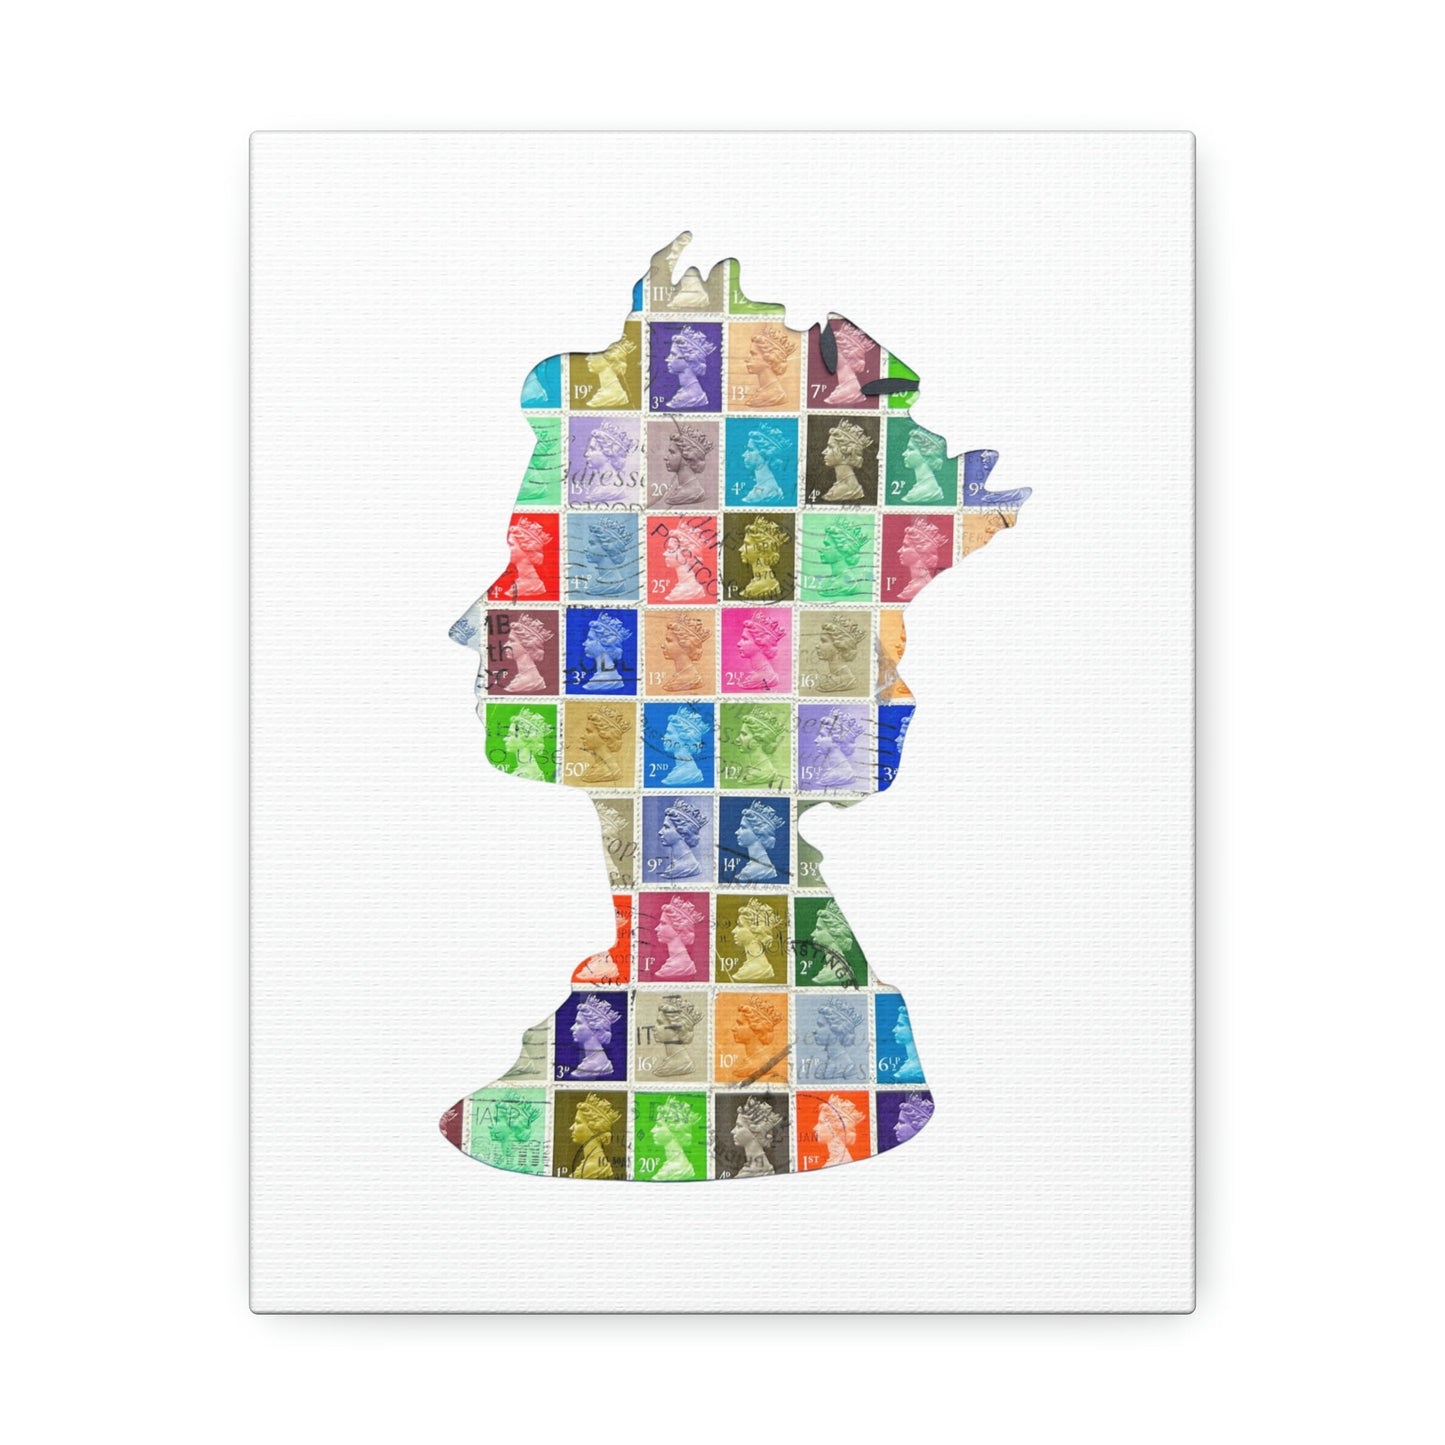 The Queens Silhouette - Vintage UK Postage Stamp Art on a Stretched Canvas